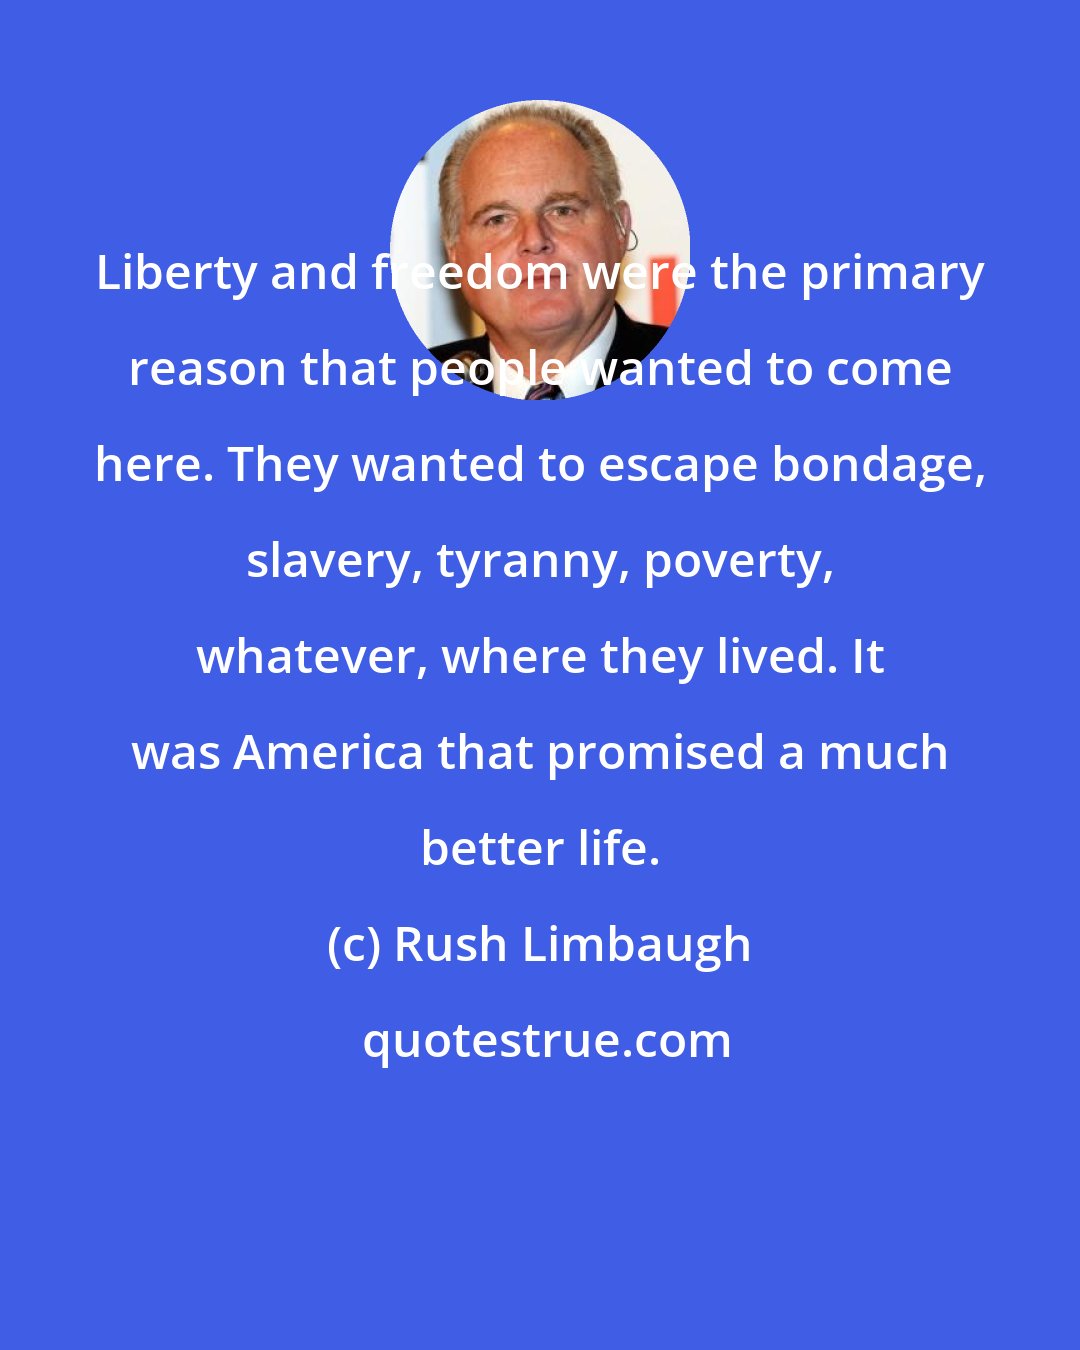 Rush Limbaugh: Liberty and freedom were the primary reason that people wanted to come here. They wanted to escape bondage, slavery, tyranny, poverty, whatever, where they lived. It was America that promised a much better life.